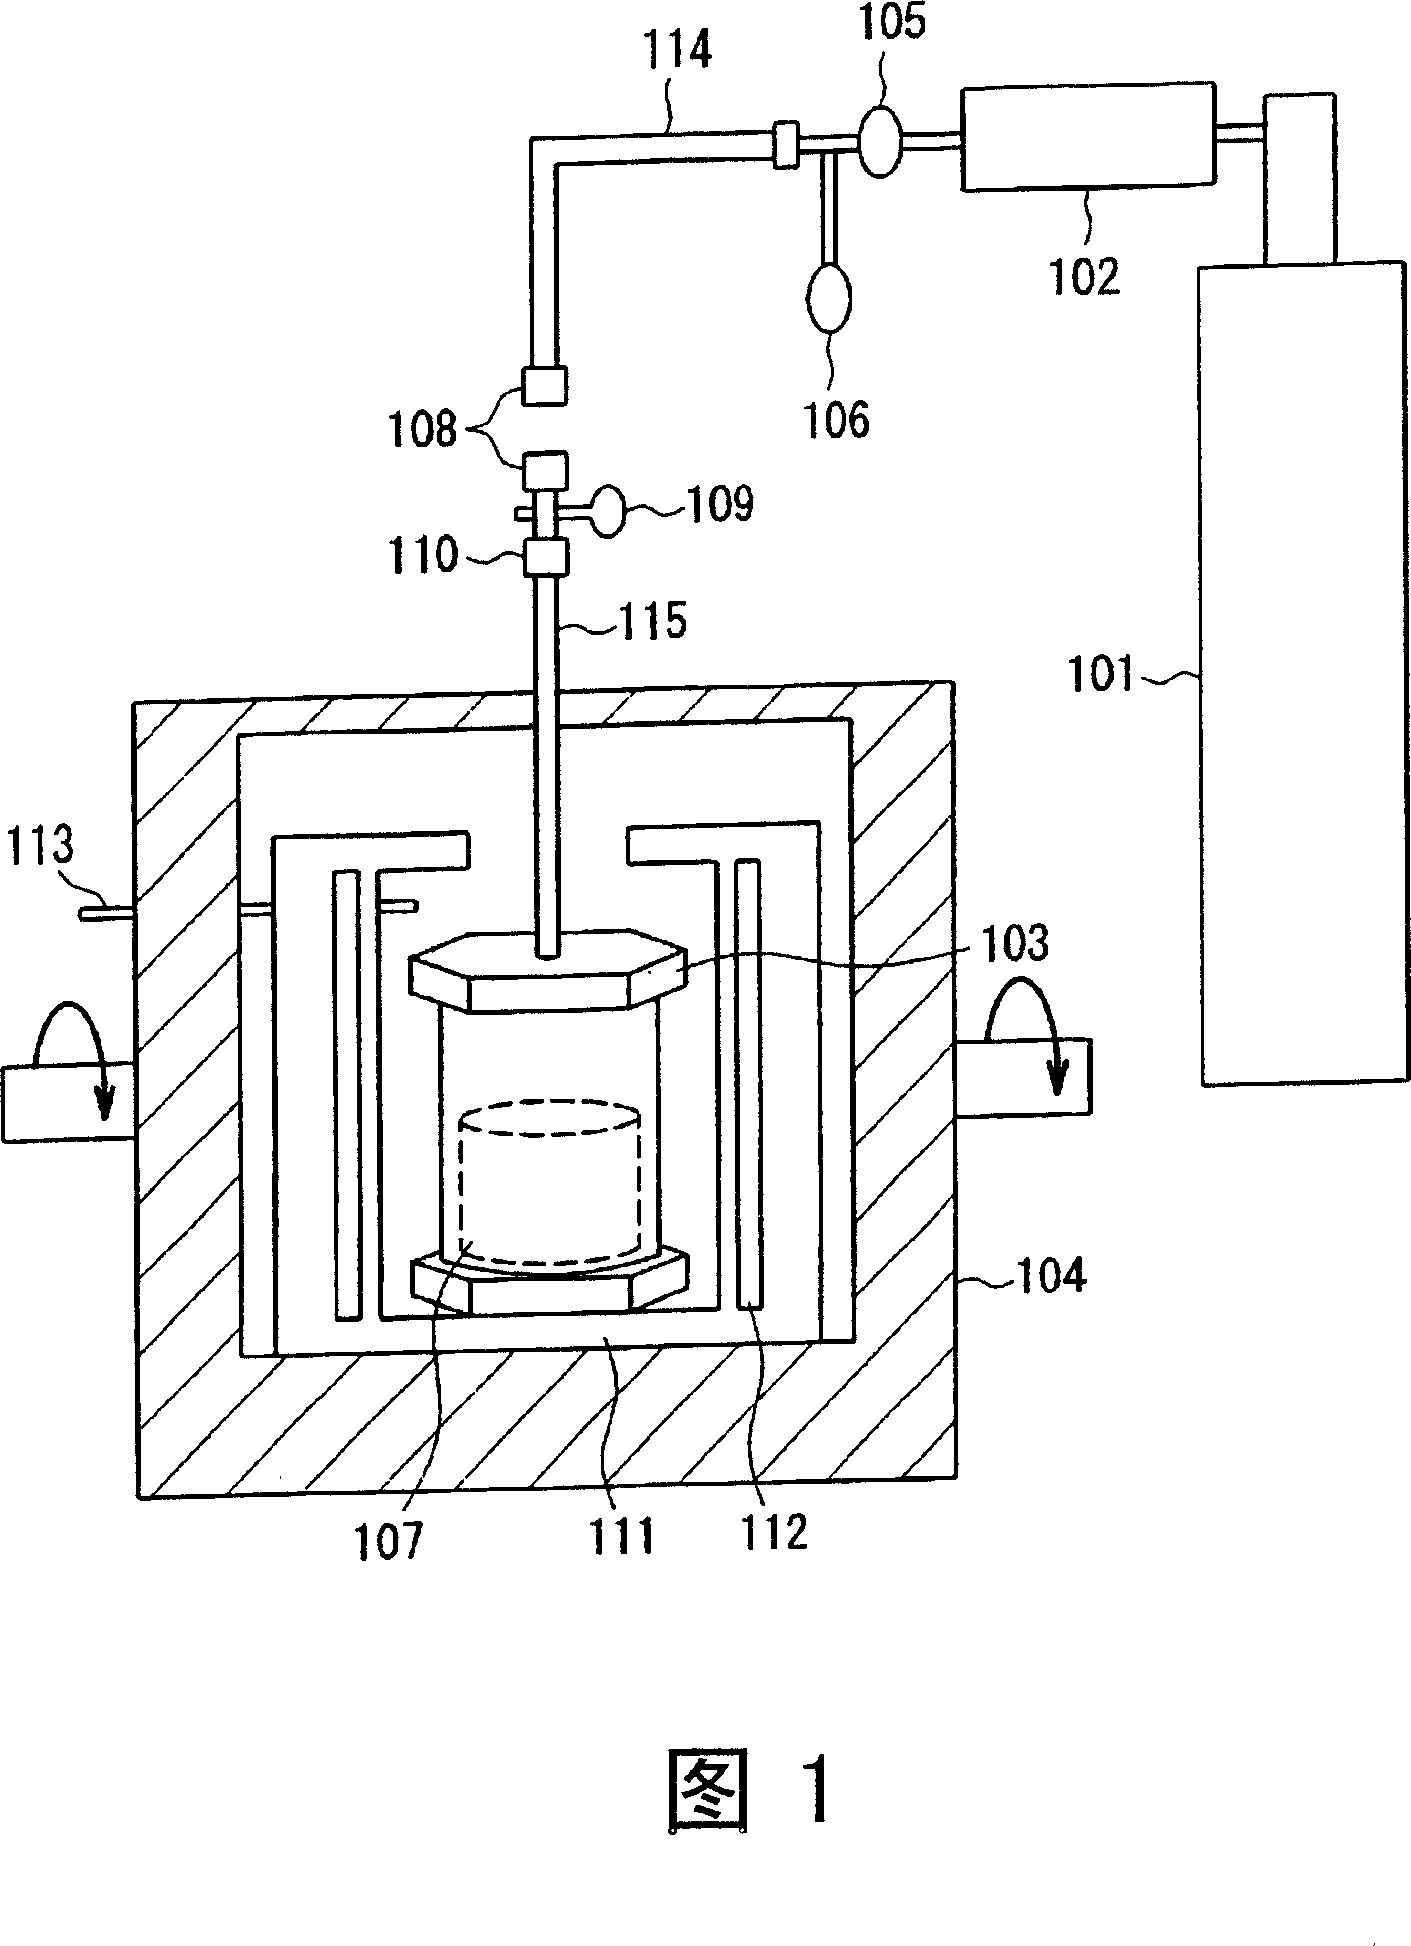 Method of manufacturing compound single crystal and apparatus for manufacturing it